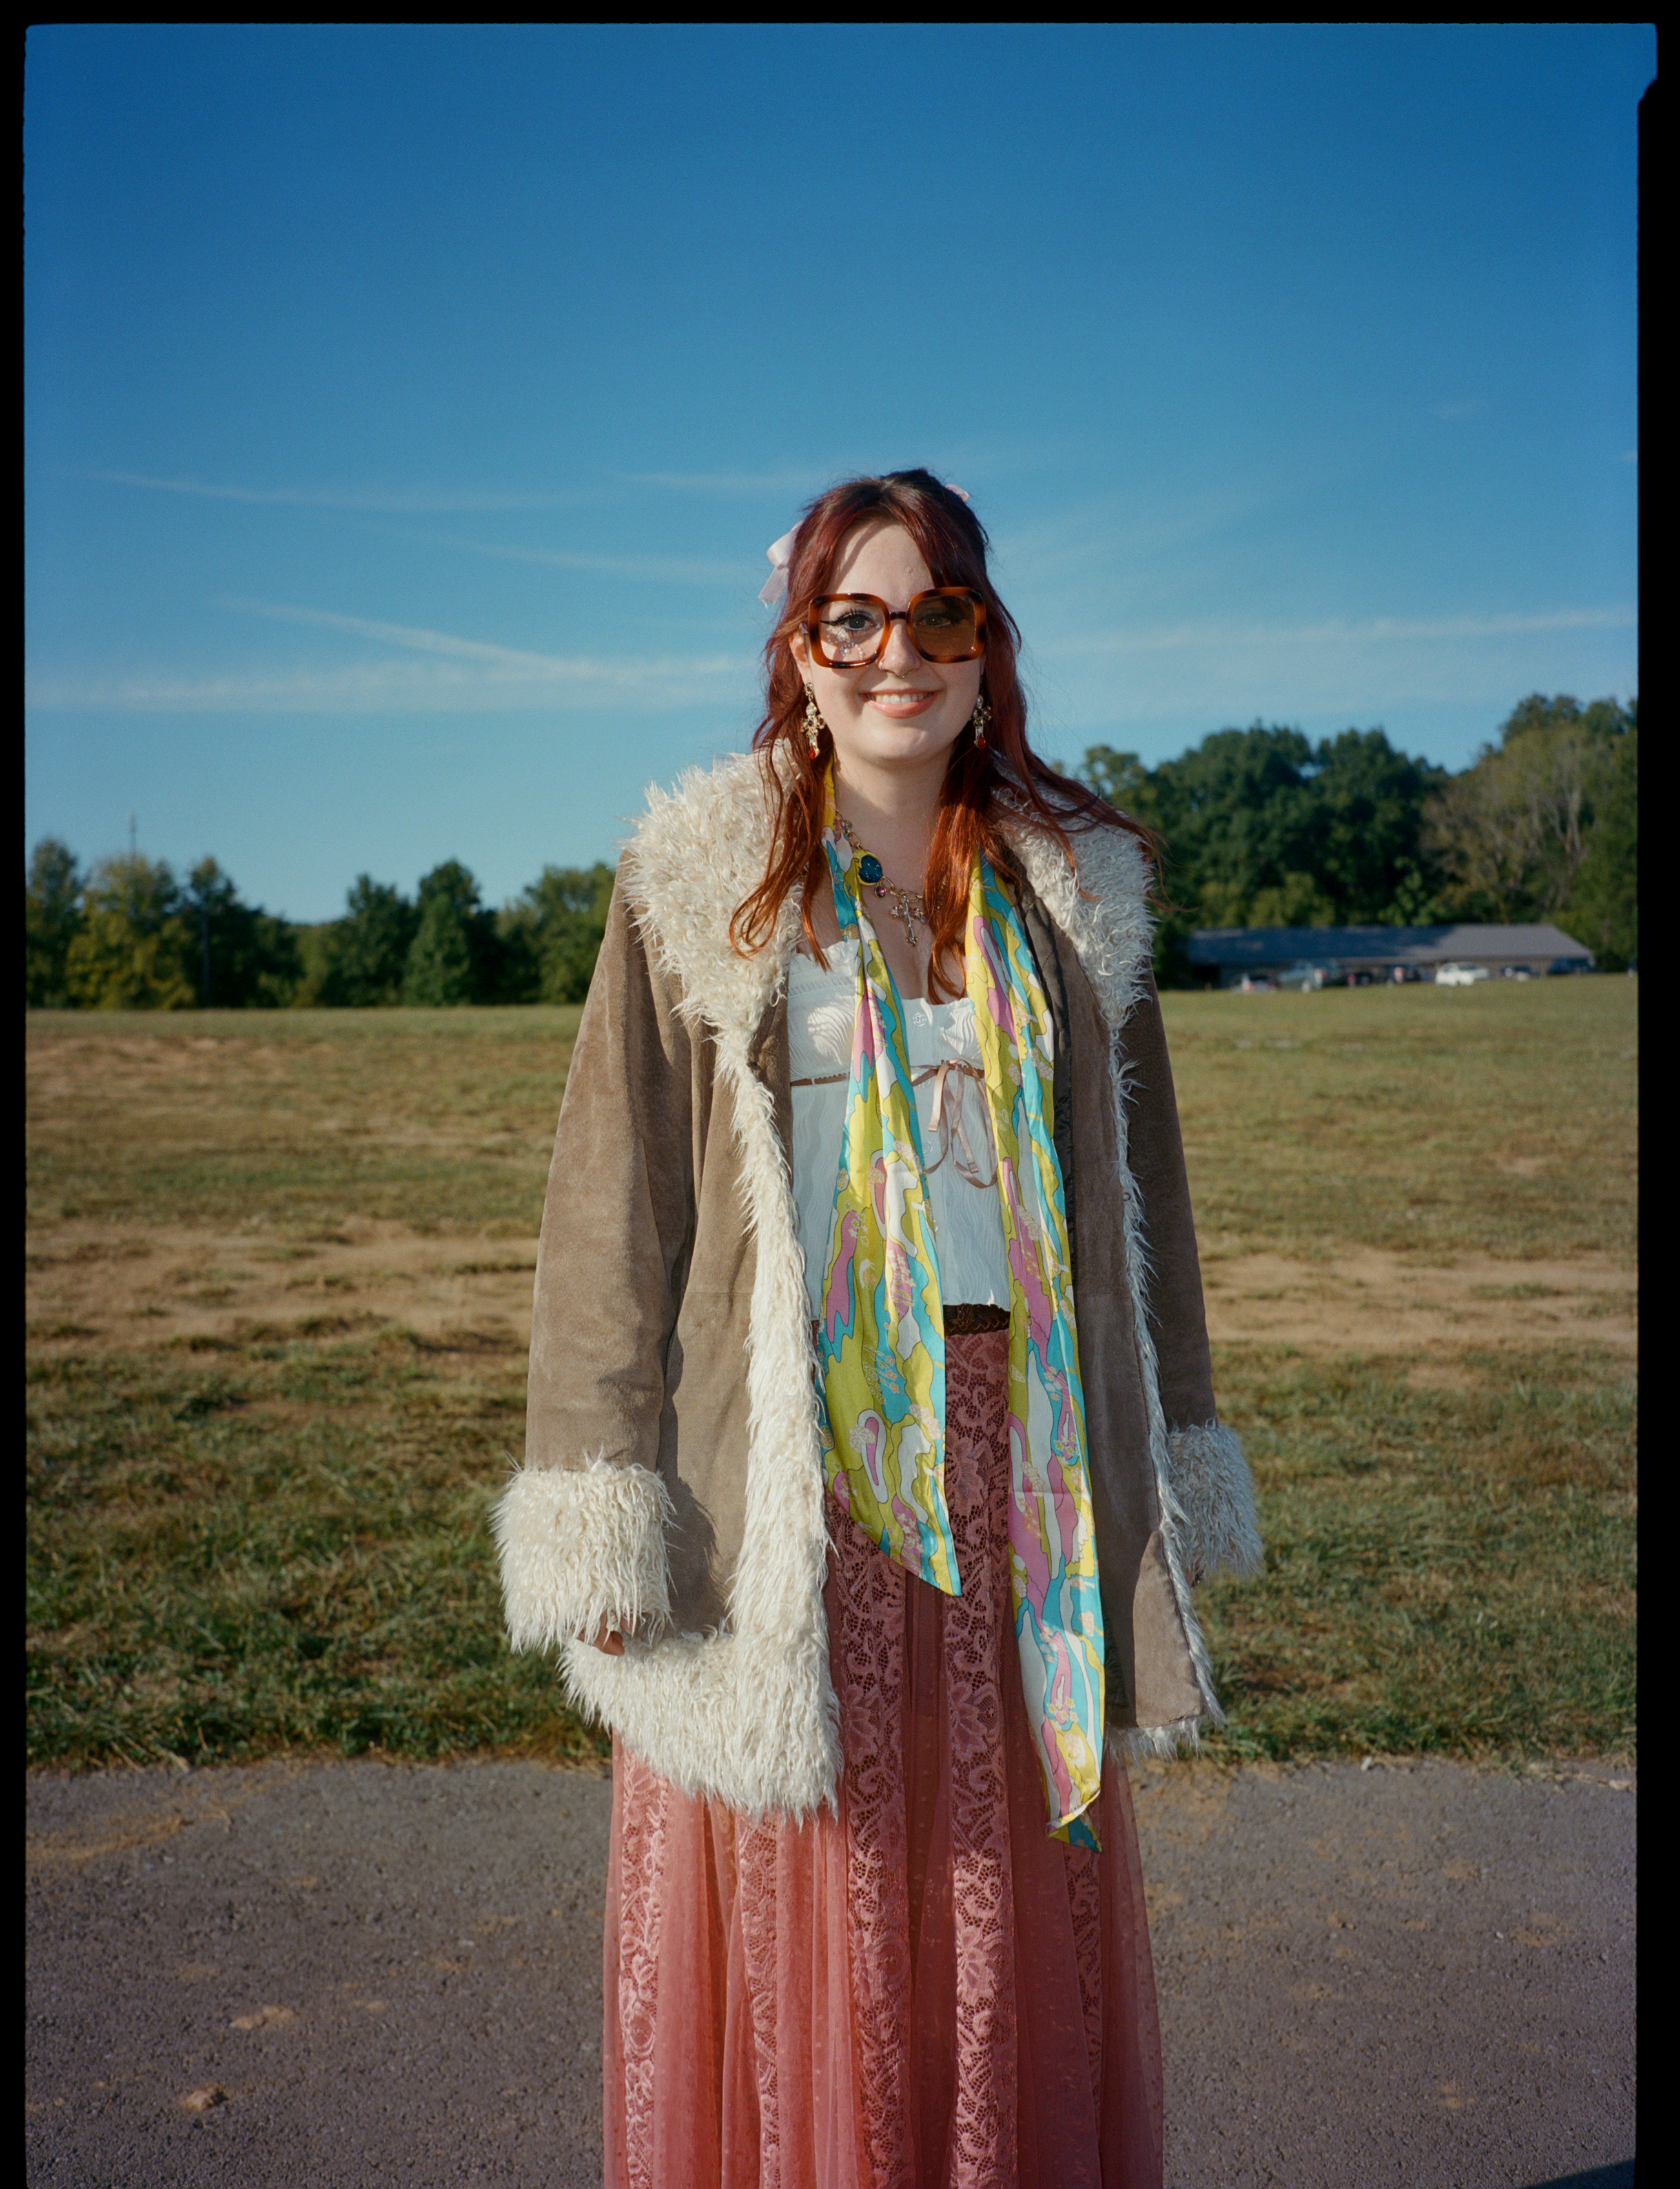 a lana del rey fan wears a fur-lined jacket and wide rimmed sunglasses. she has a long pink skirt on and has a multicolour scarf round her neck.